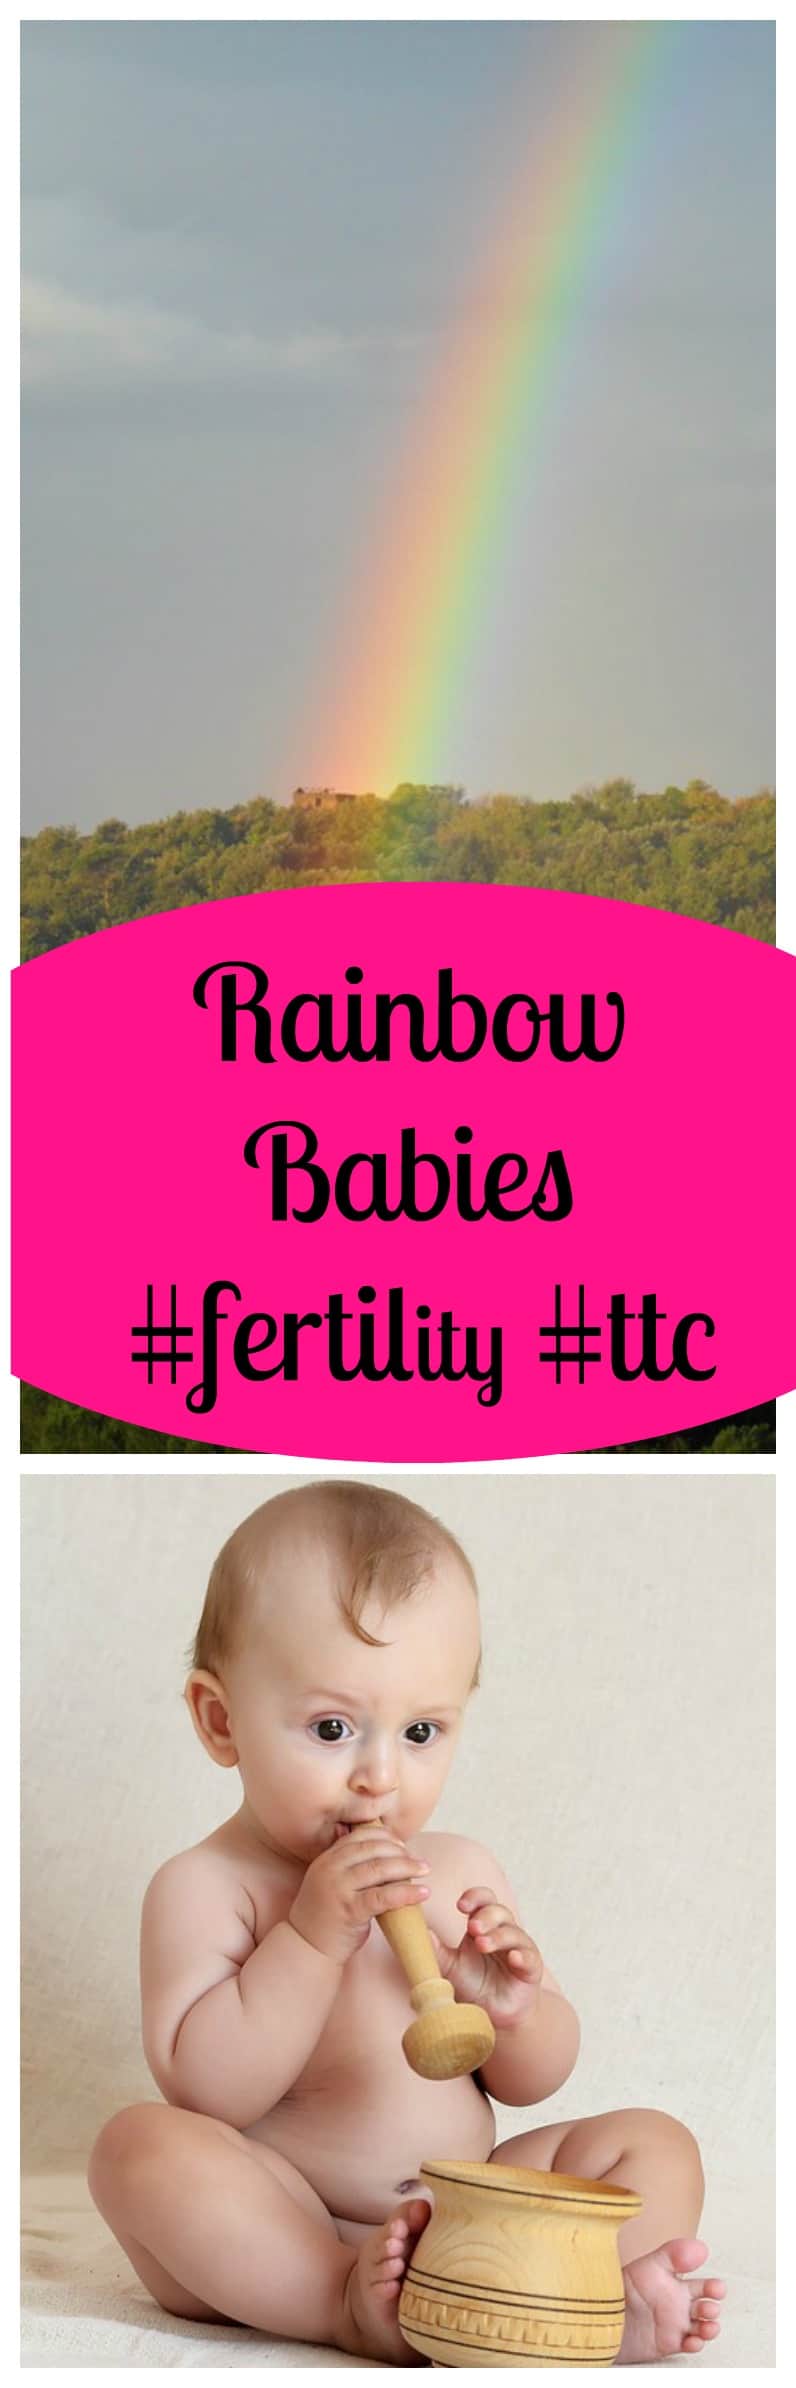 Rainbow Baby @shawsimpleswaps #fertility #ttc A light at the end of a dark tunnel of infertility & loss.